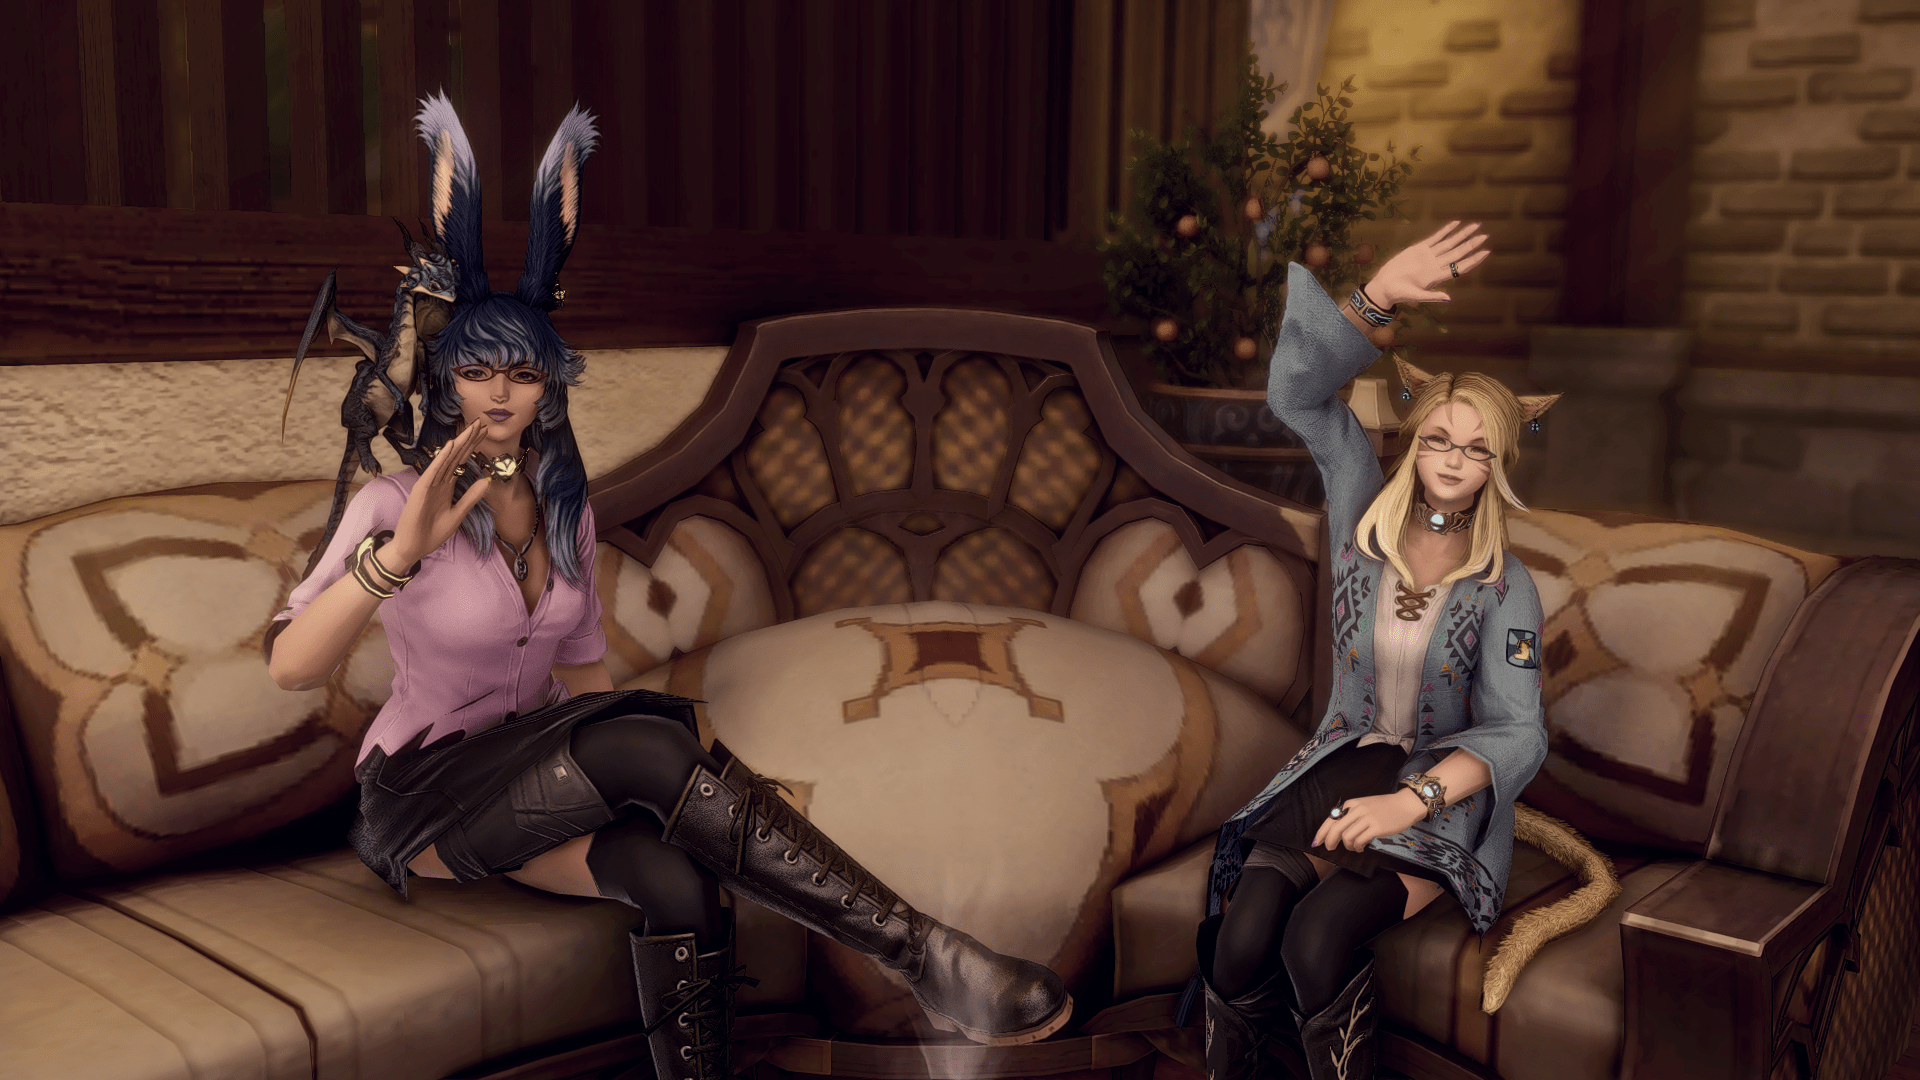 Us Sisters waving while sitting on a couch in Final Fantasy XIV.